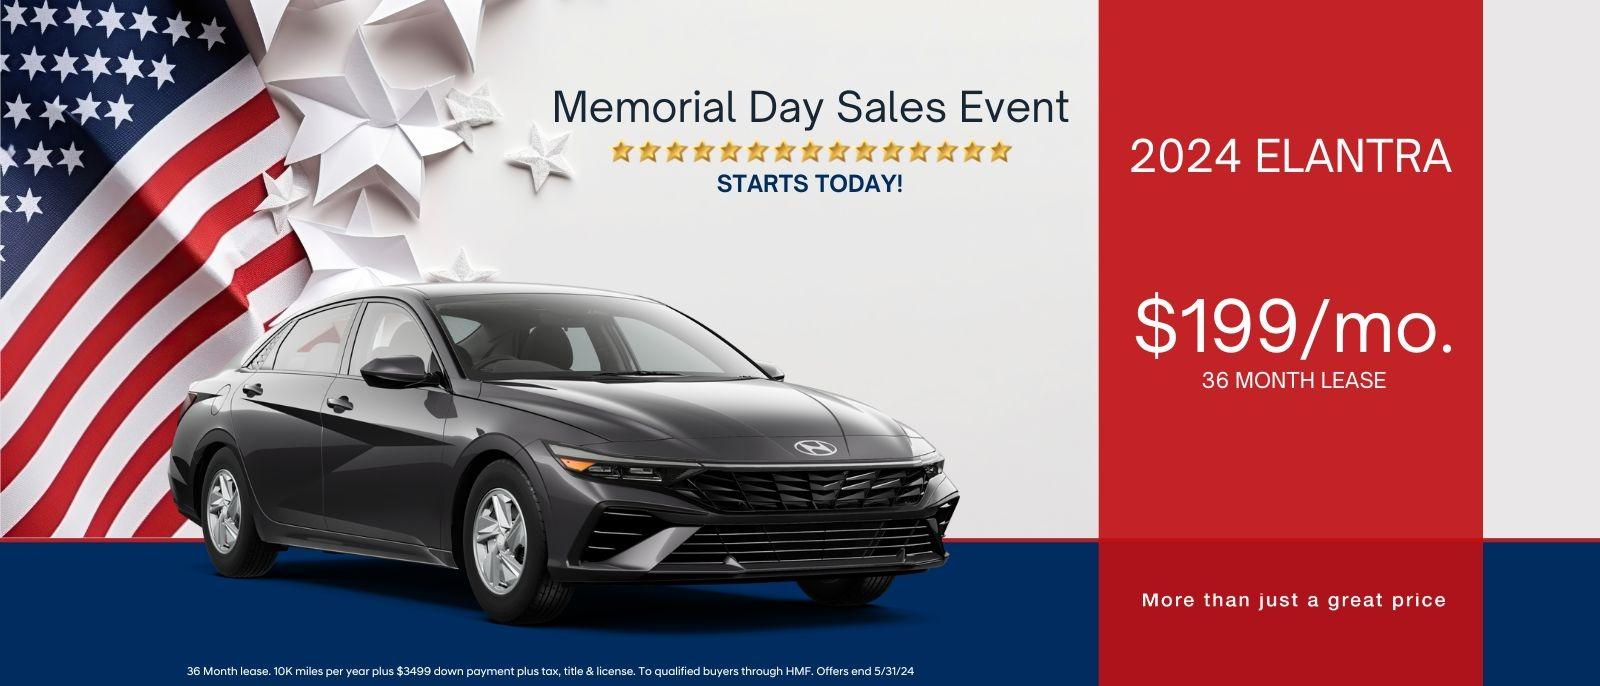 Memorial Day Sales Event Starts Today!
2024 Elantra
$199/mo 36 month lease 
More than just a great price